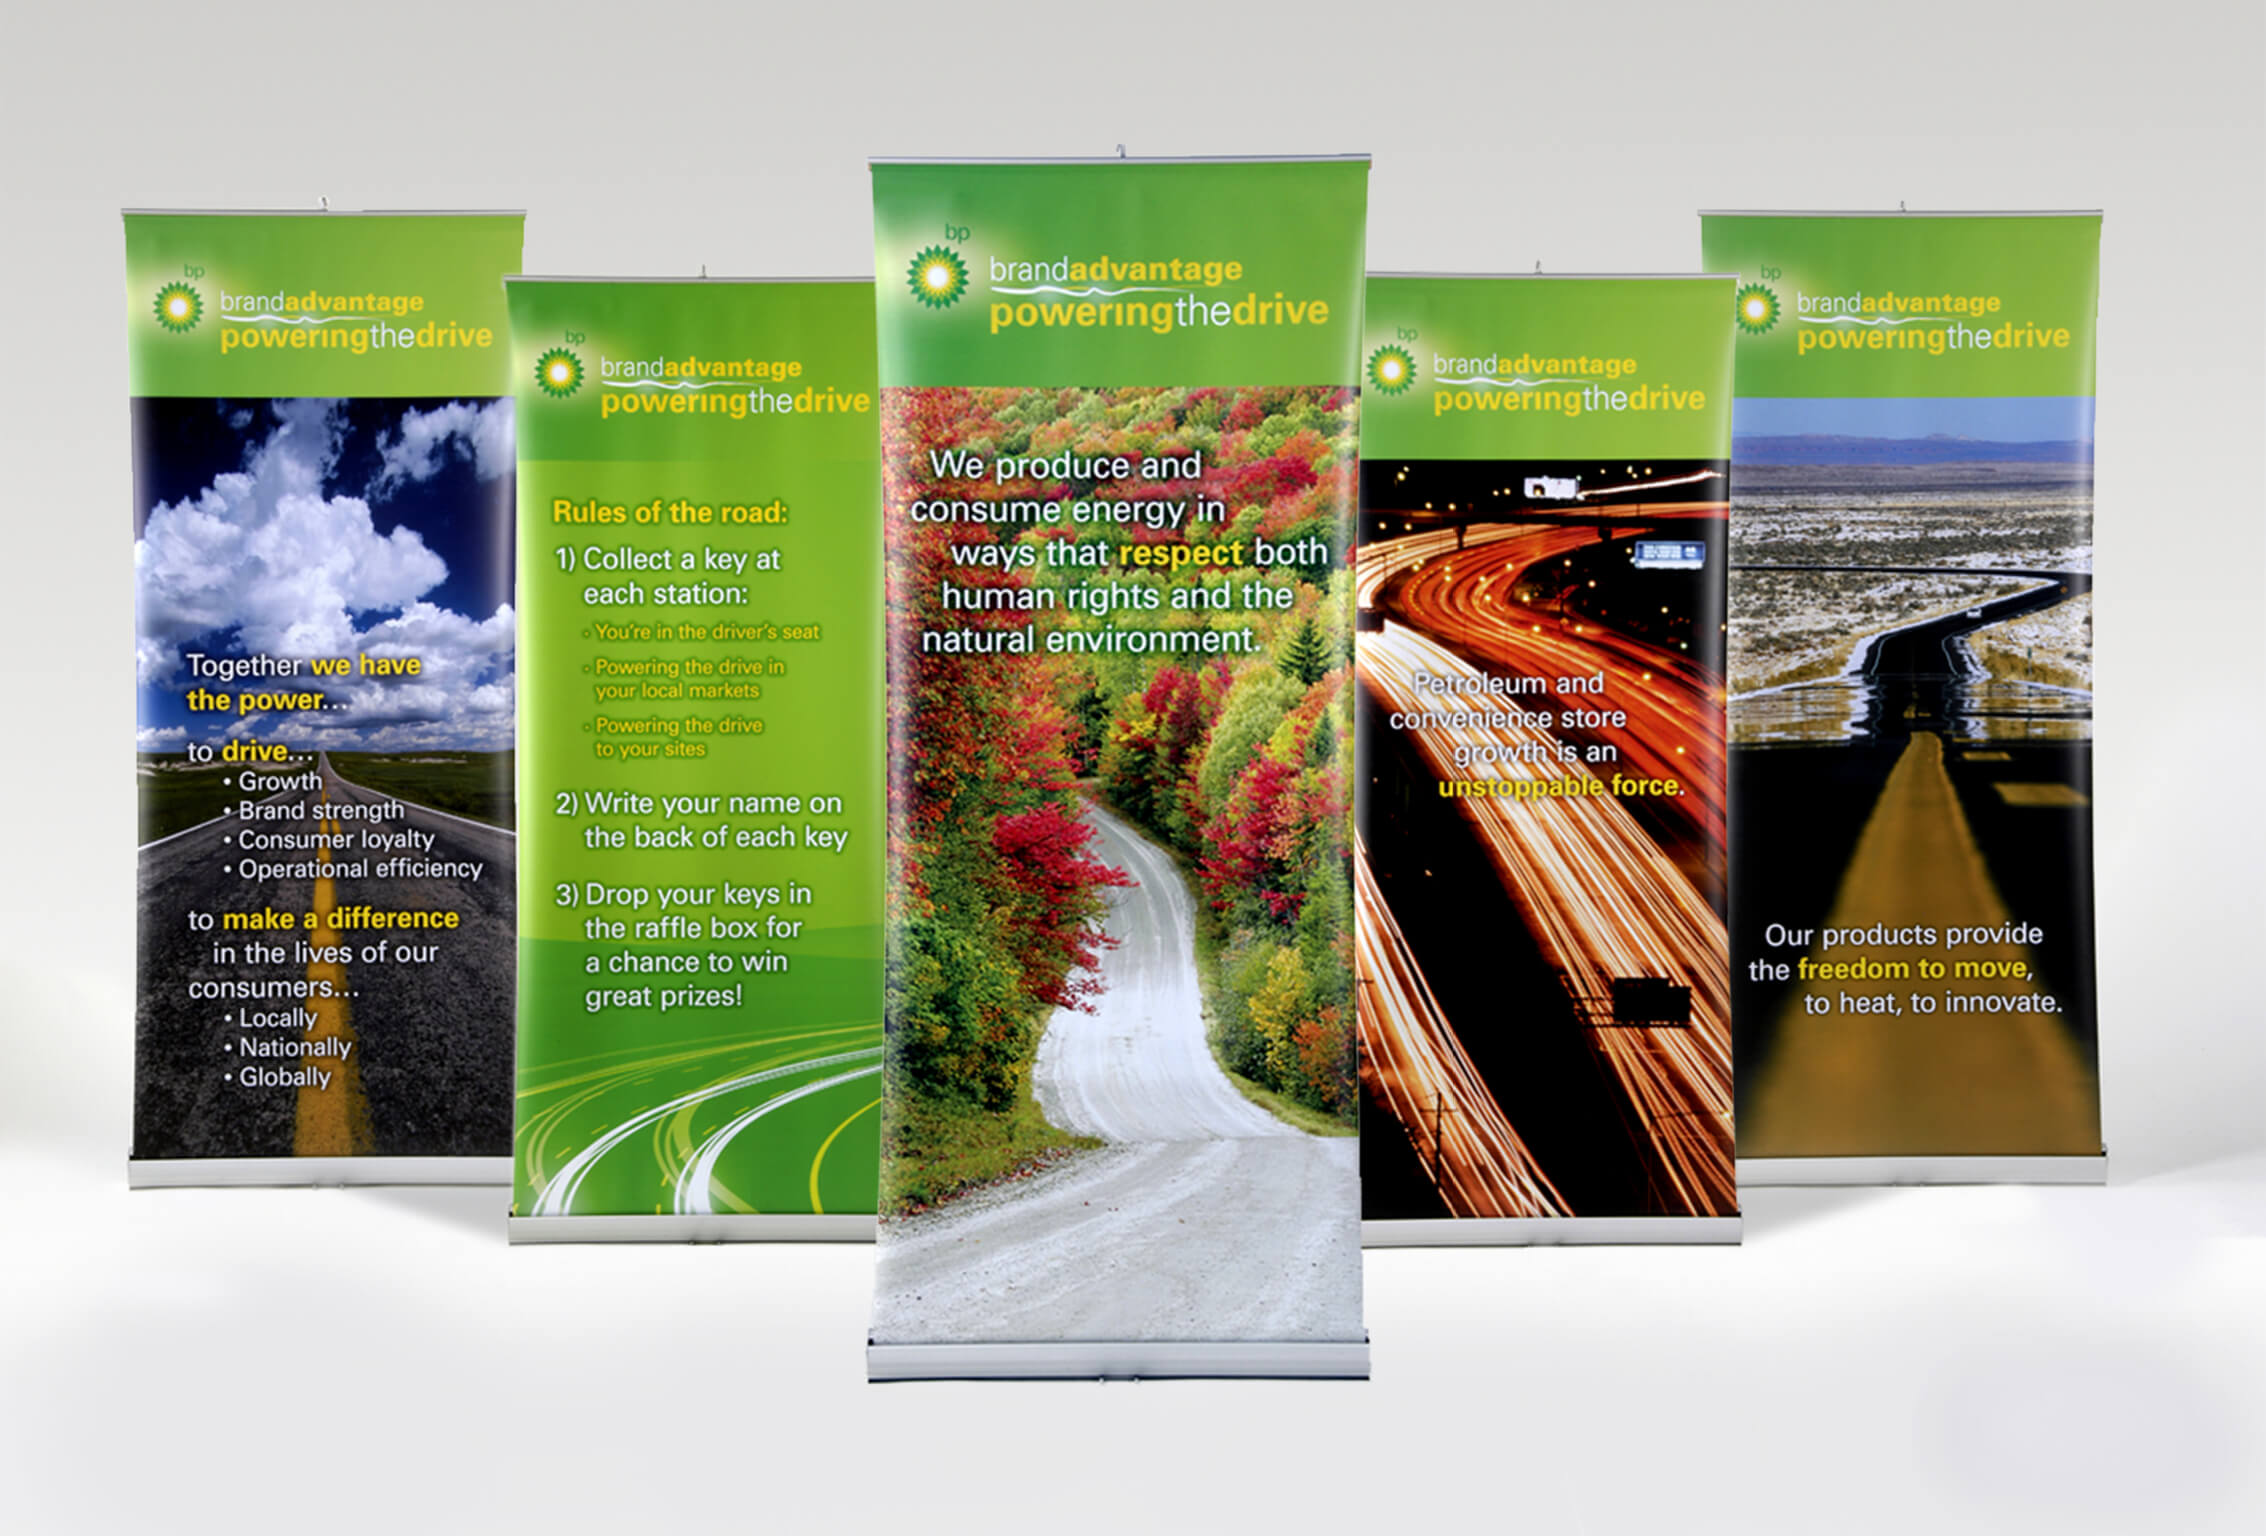 golin bp power the drive retractable banners image